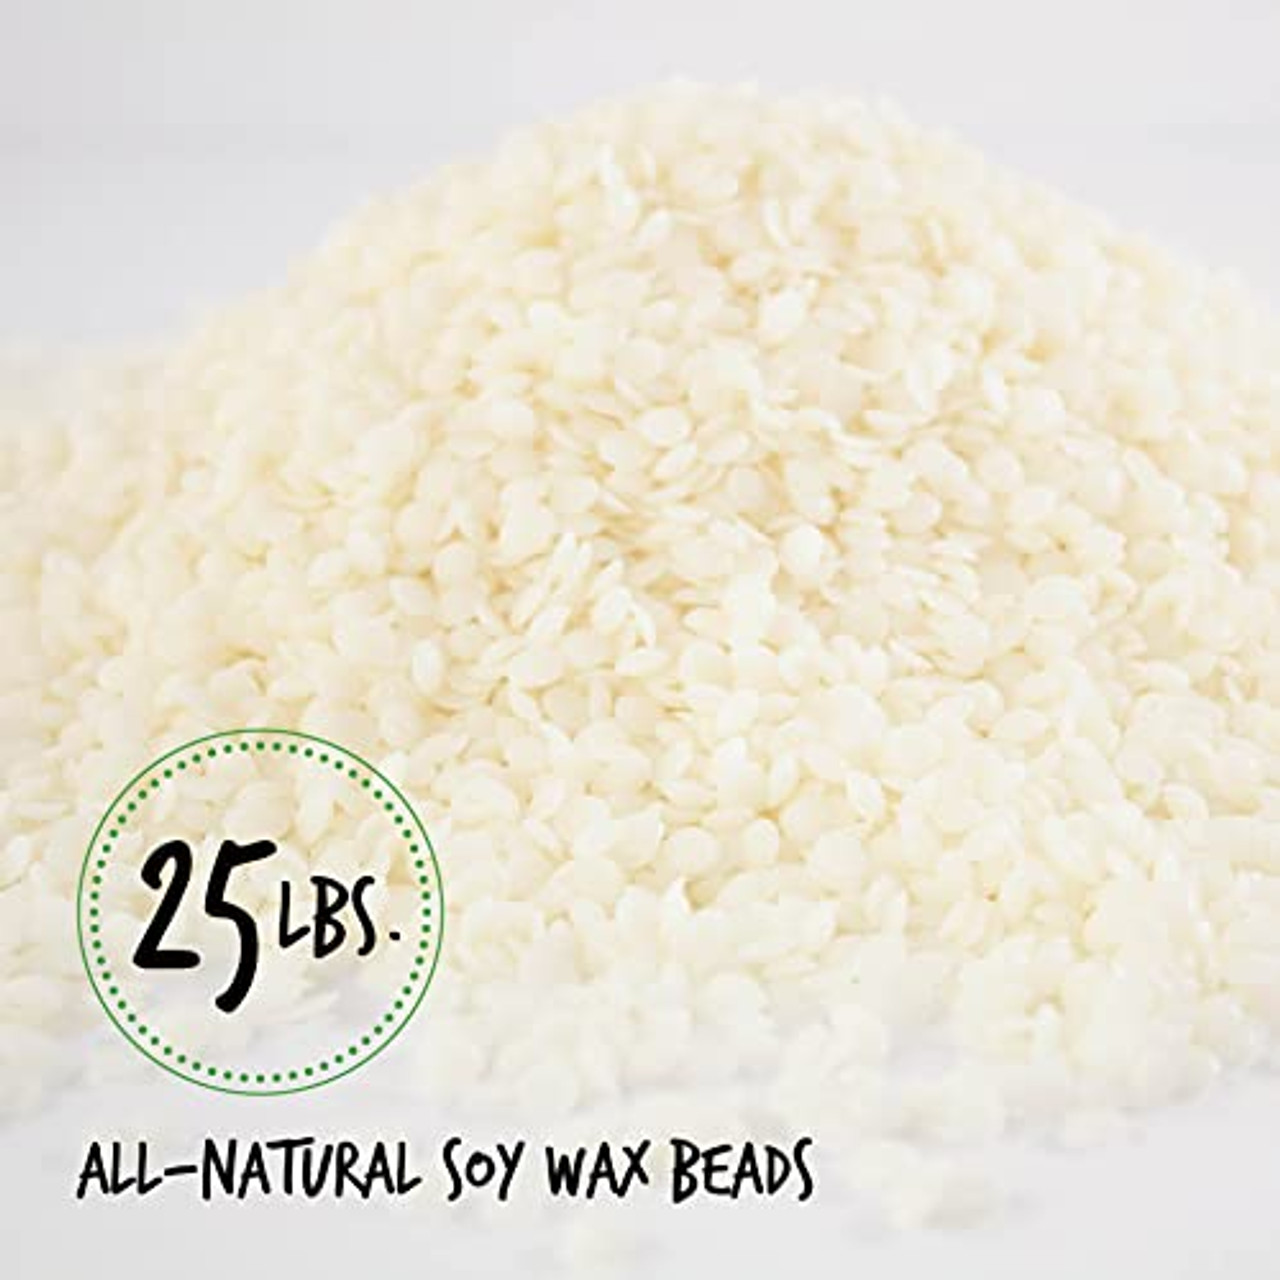 Soy Wax Flakes vs. Soy Wax Beads for candles